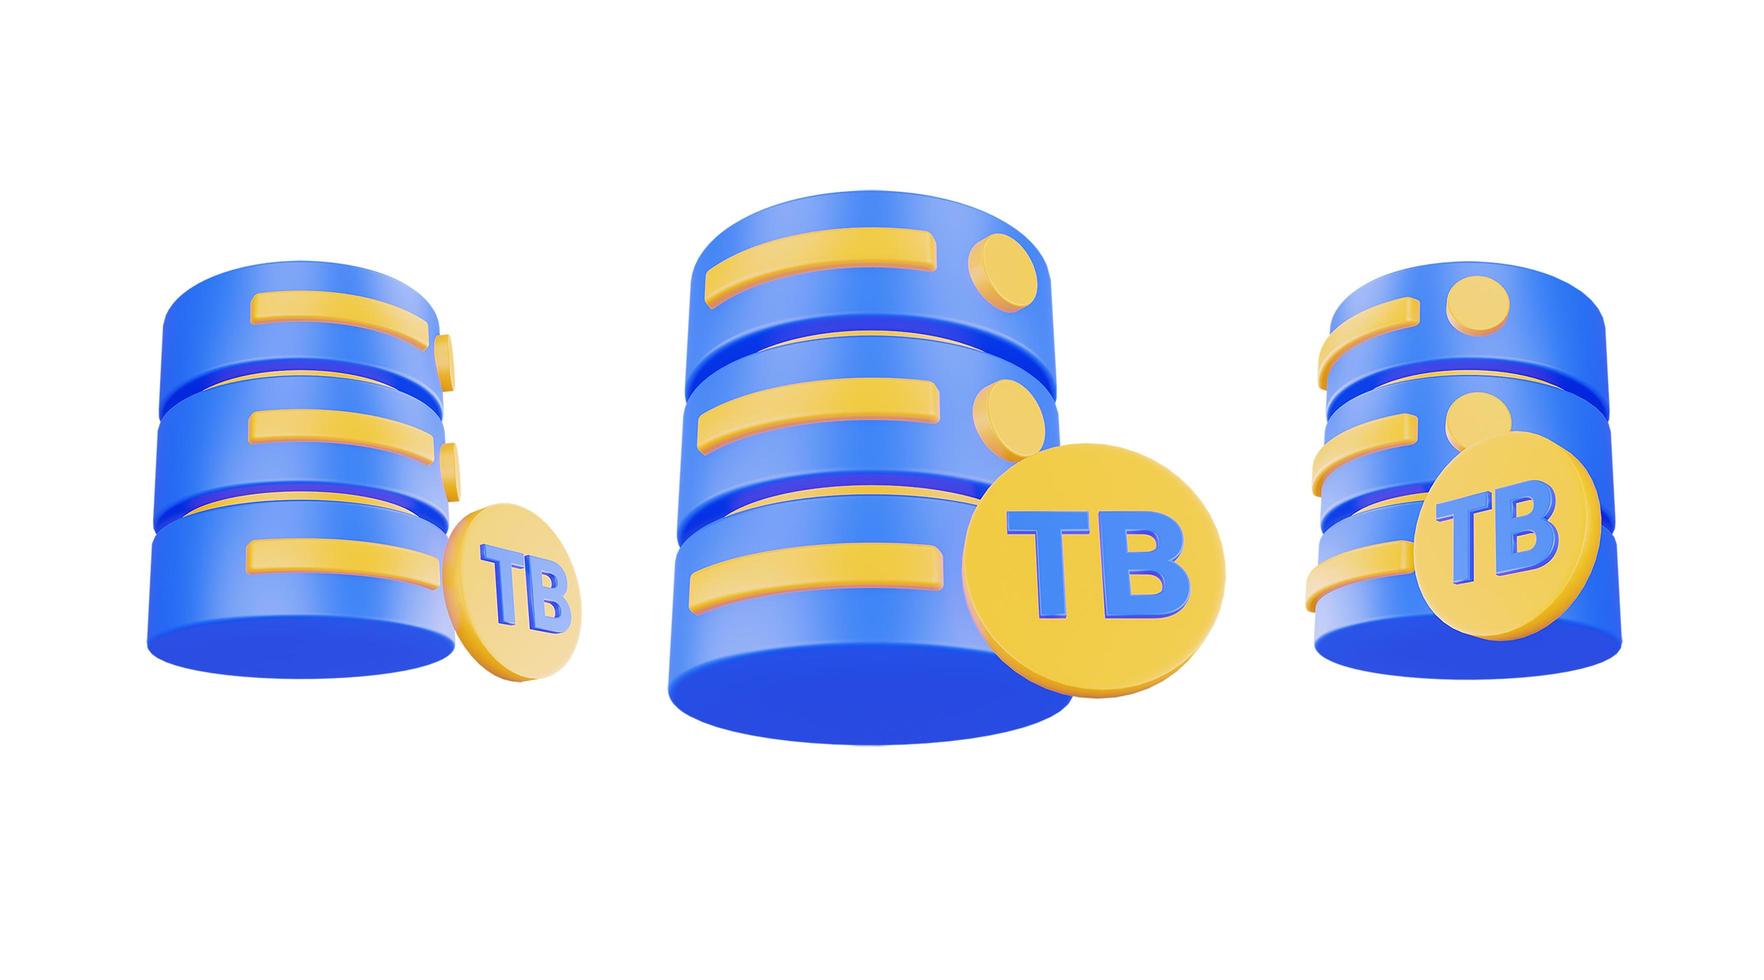 3d render database server icon with terabyte icon isolated photo